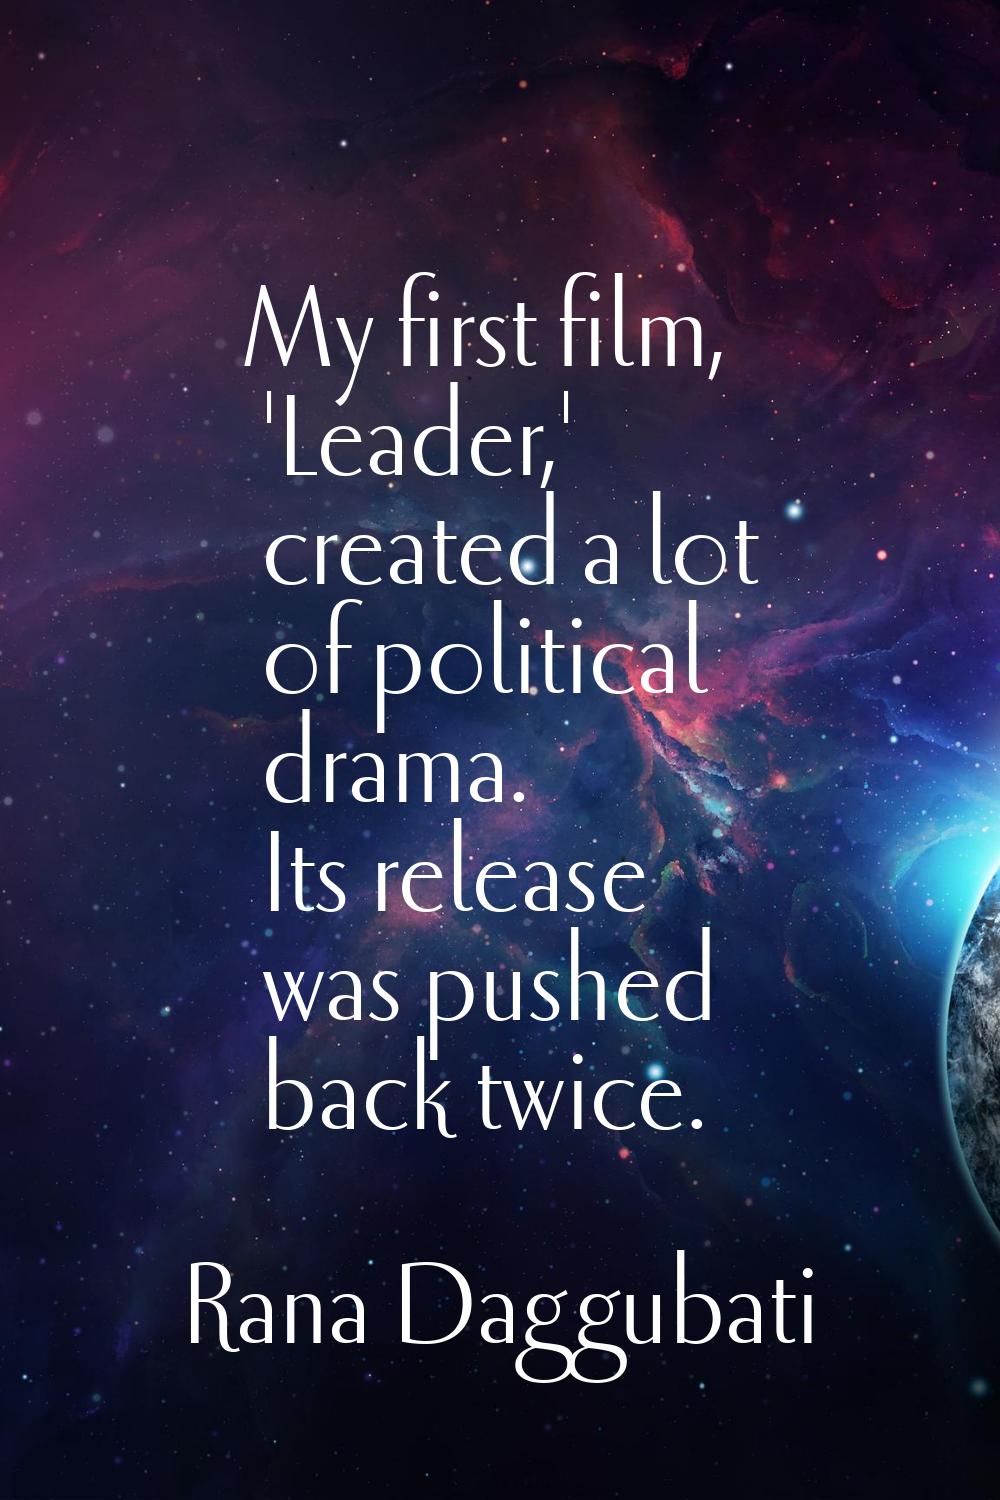 My first film, 'Leader,' created a lot of political drama. Its release was pushed back twice.